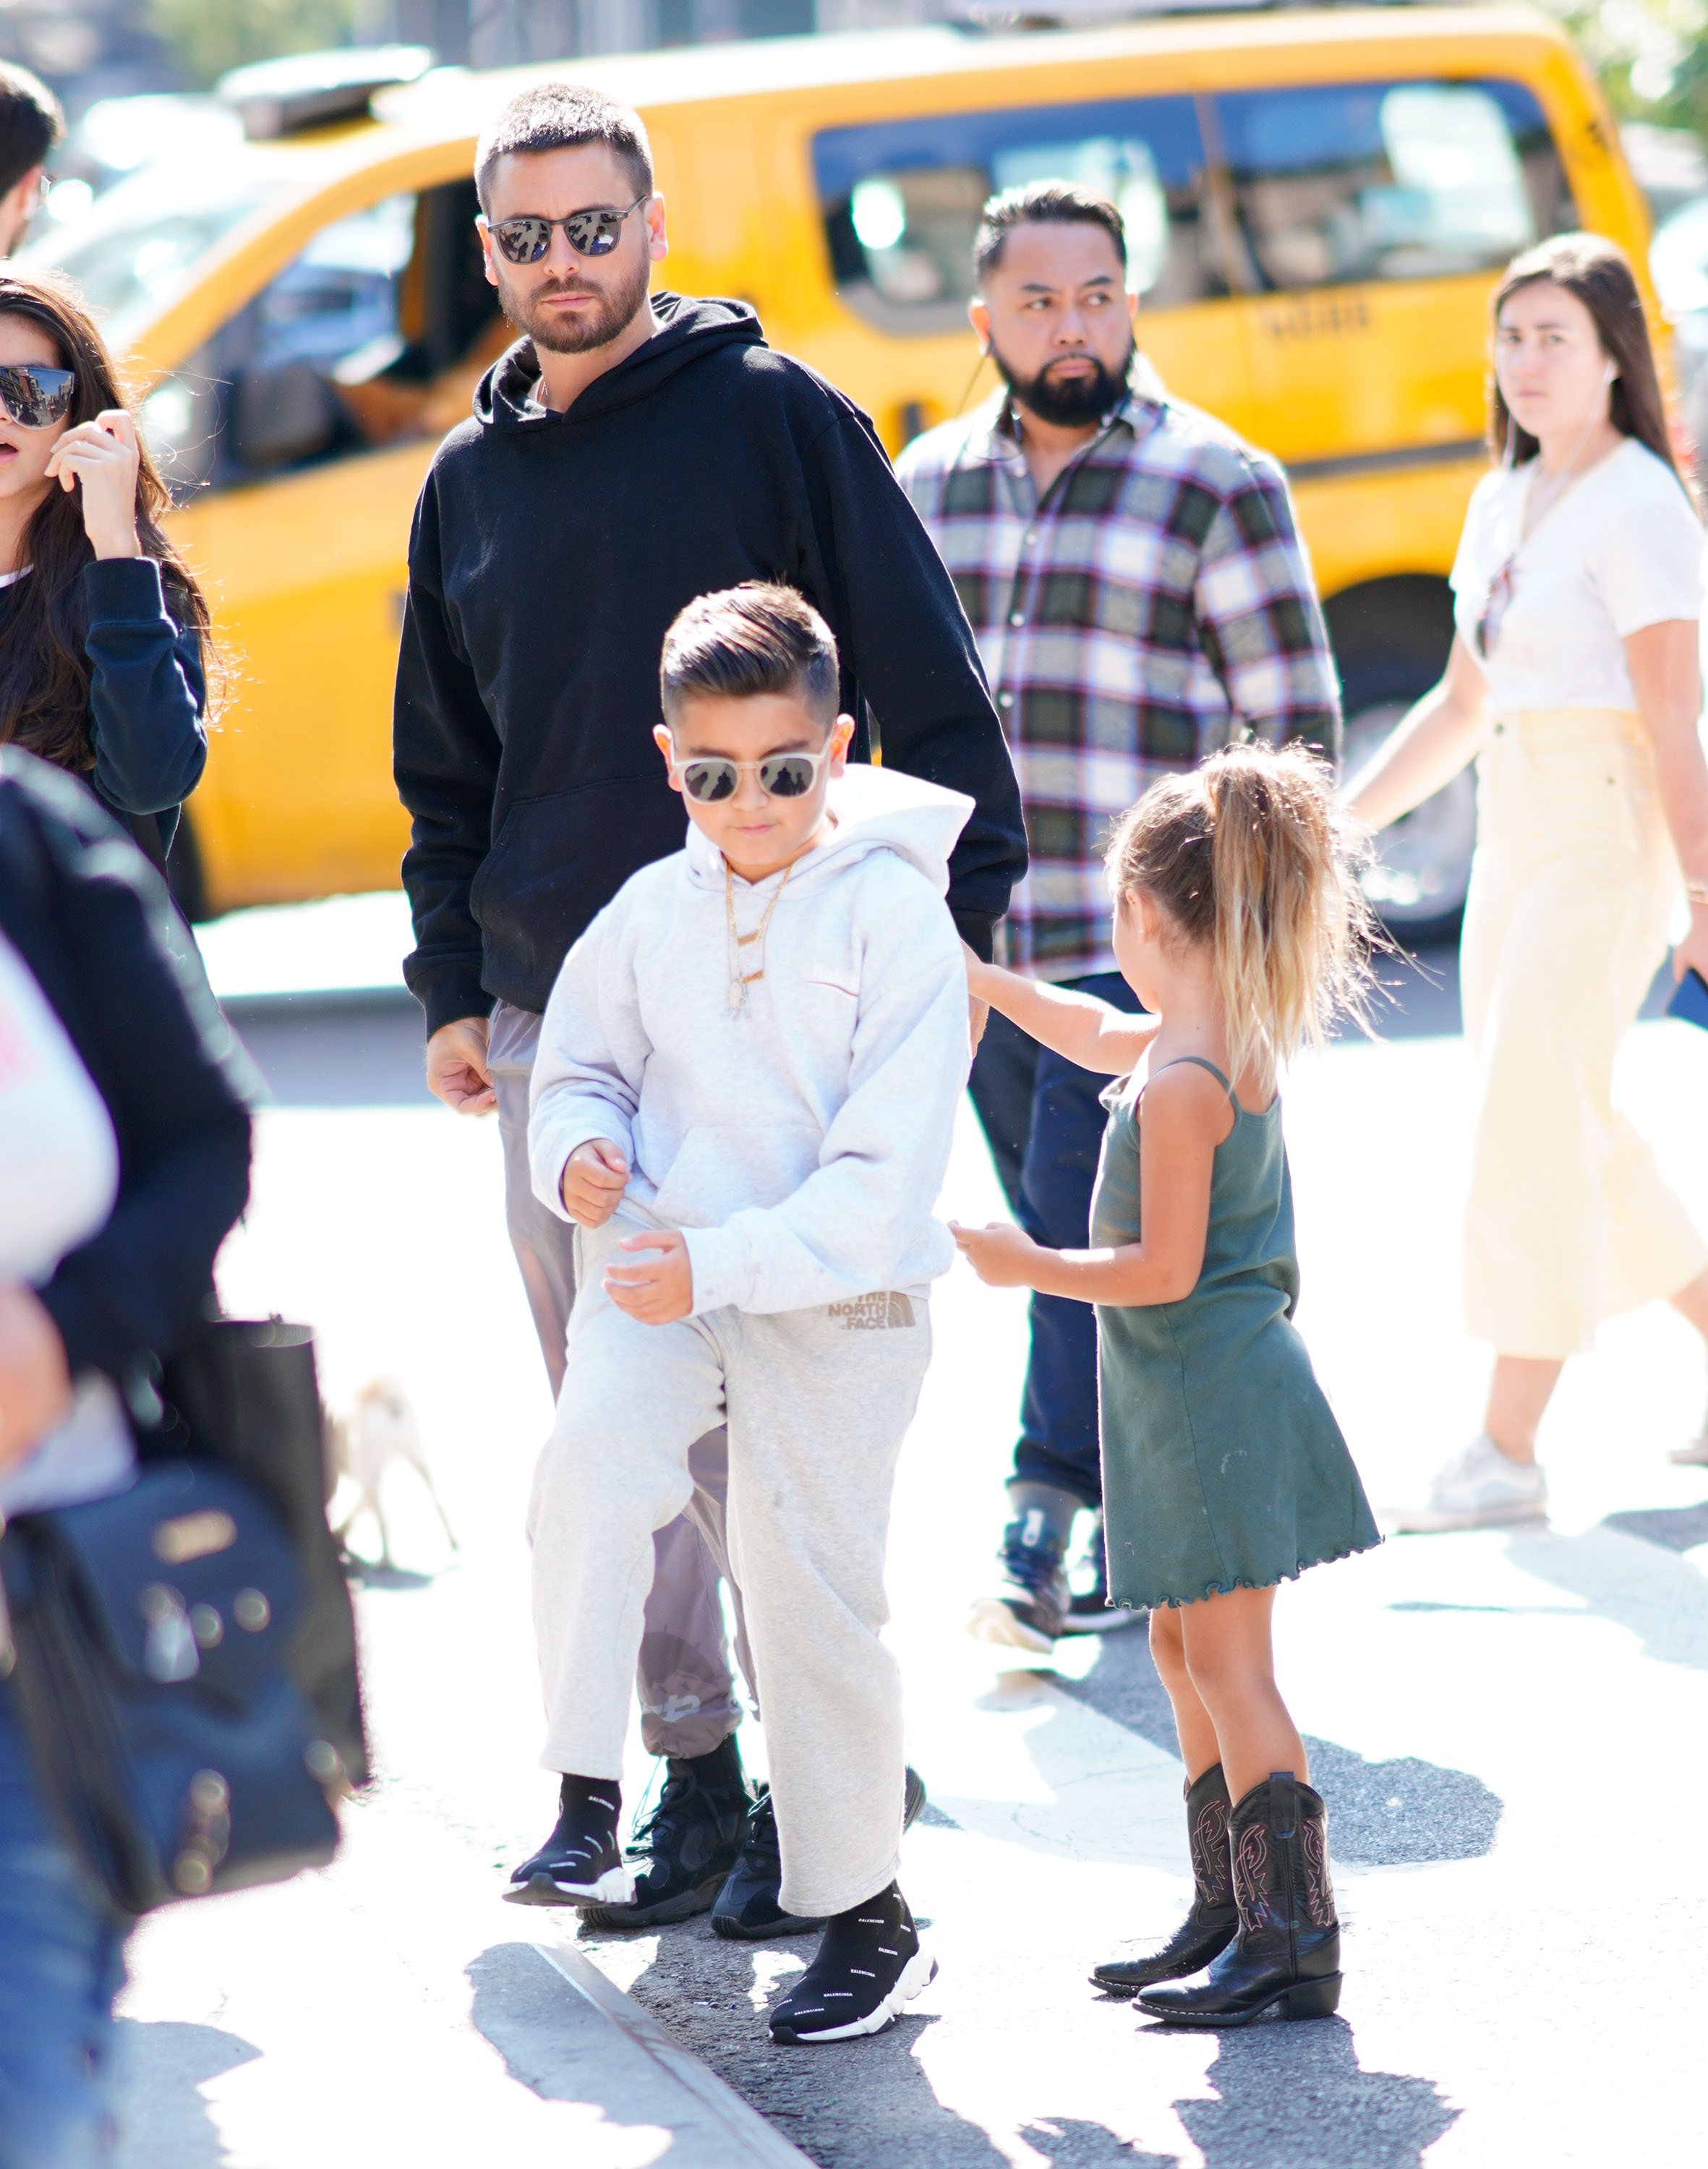 Scott Disick and Kourtney Kardashian take their kids Mason, Penelope, Reign to lunch on September 30, 2018 in New York City. | Source: Getty Images